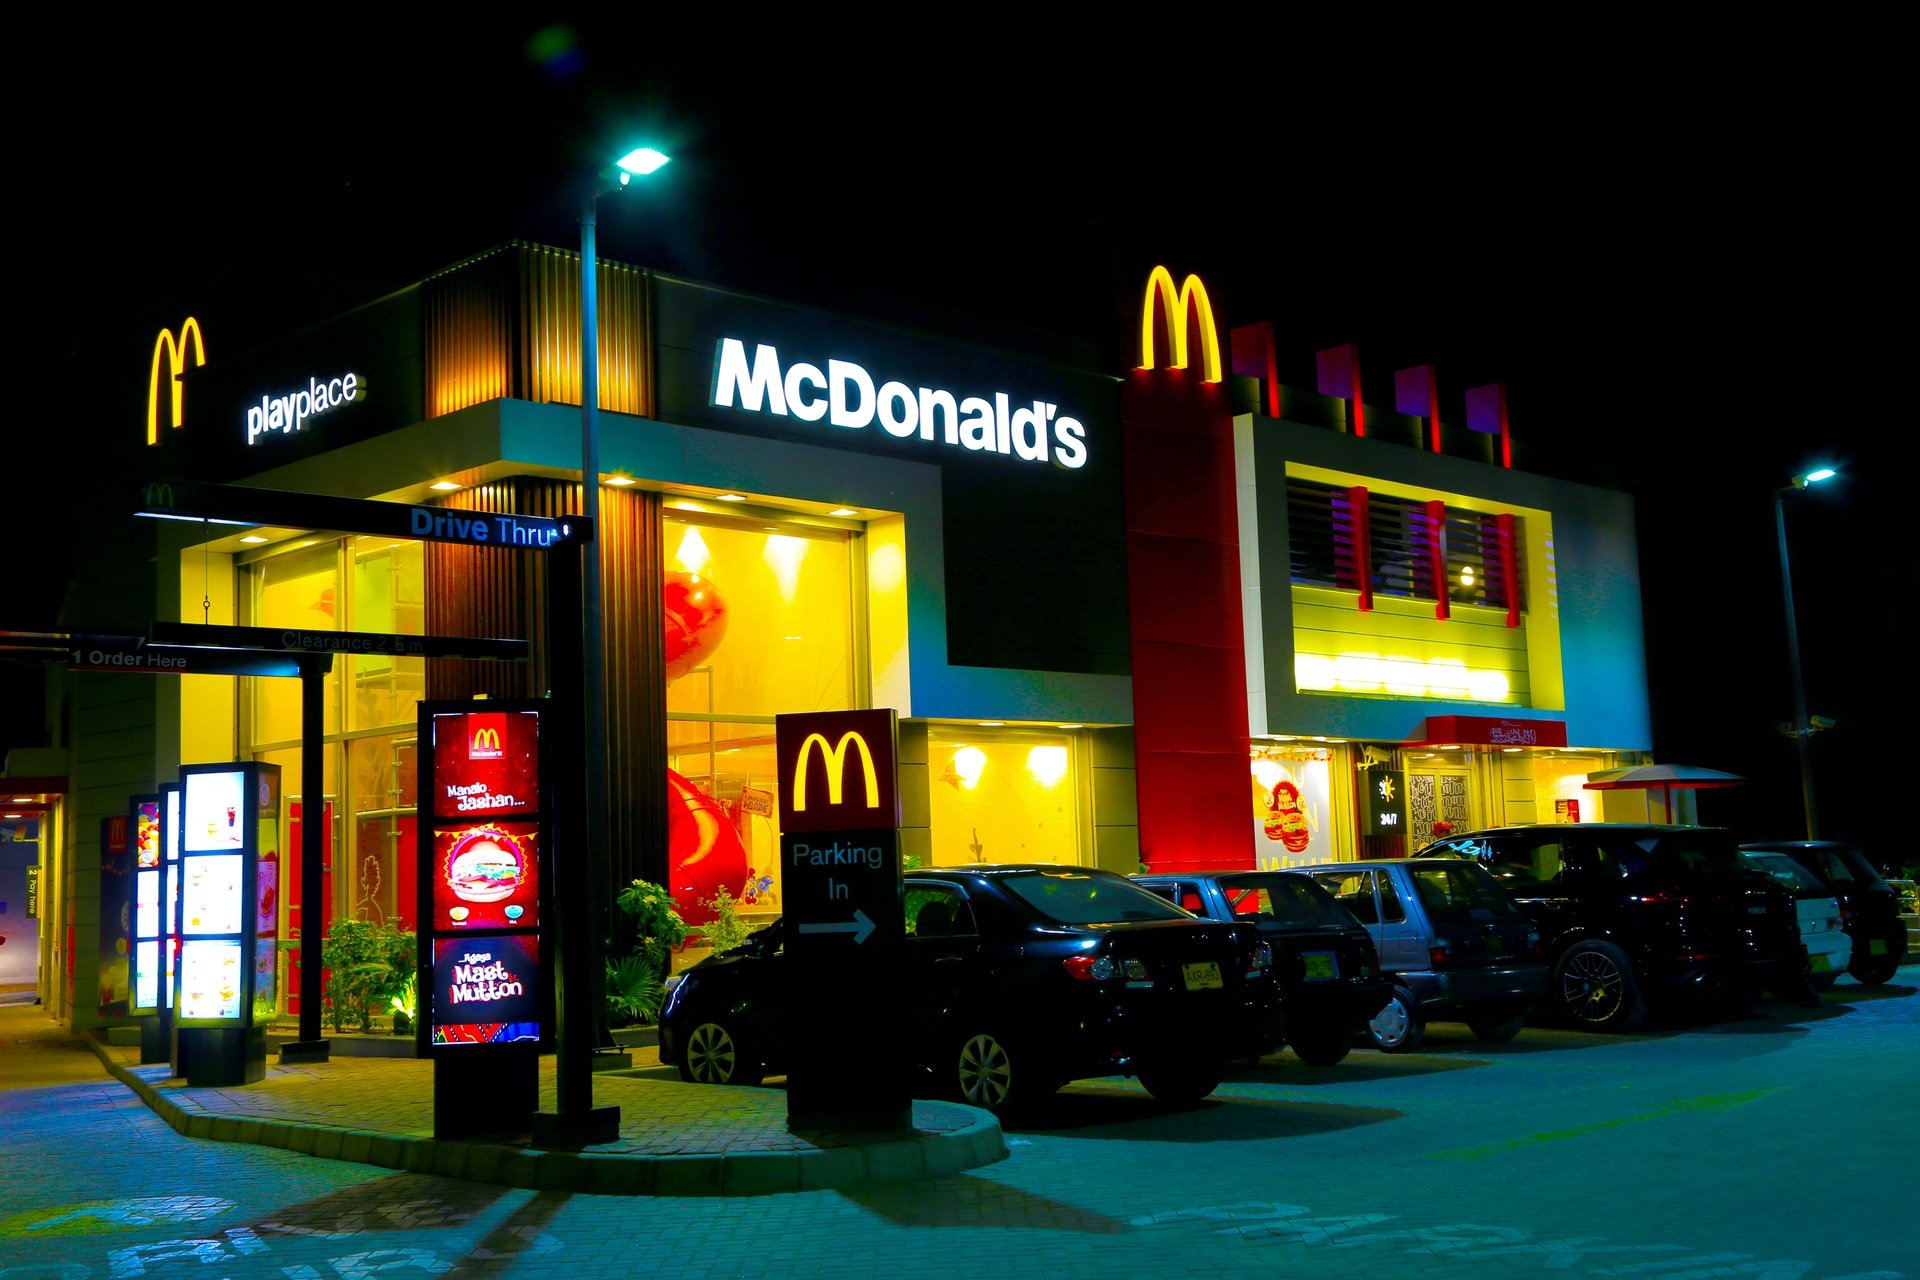 It was a busy day at McDonald's | Source: Unsplash